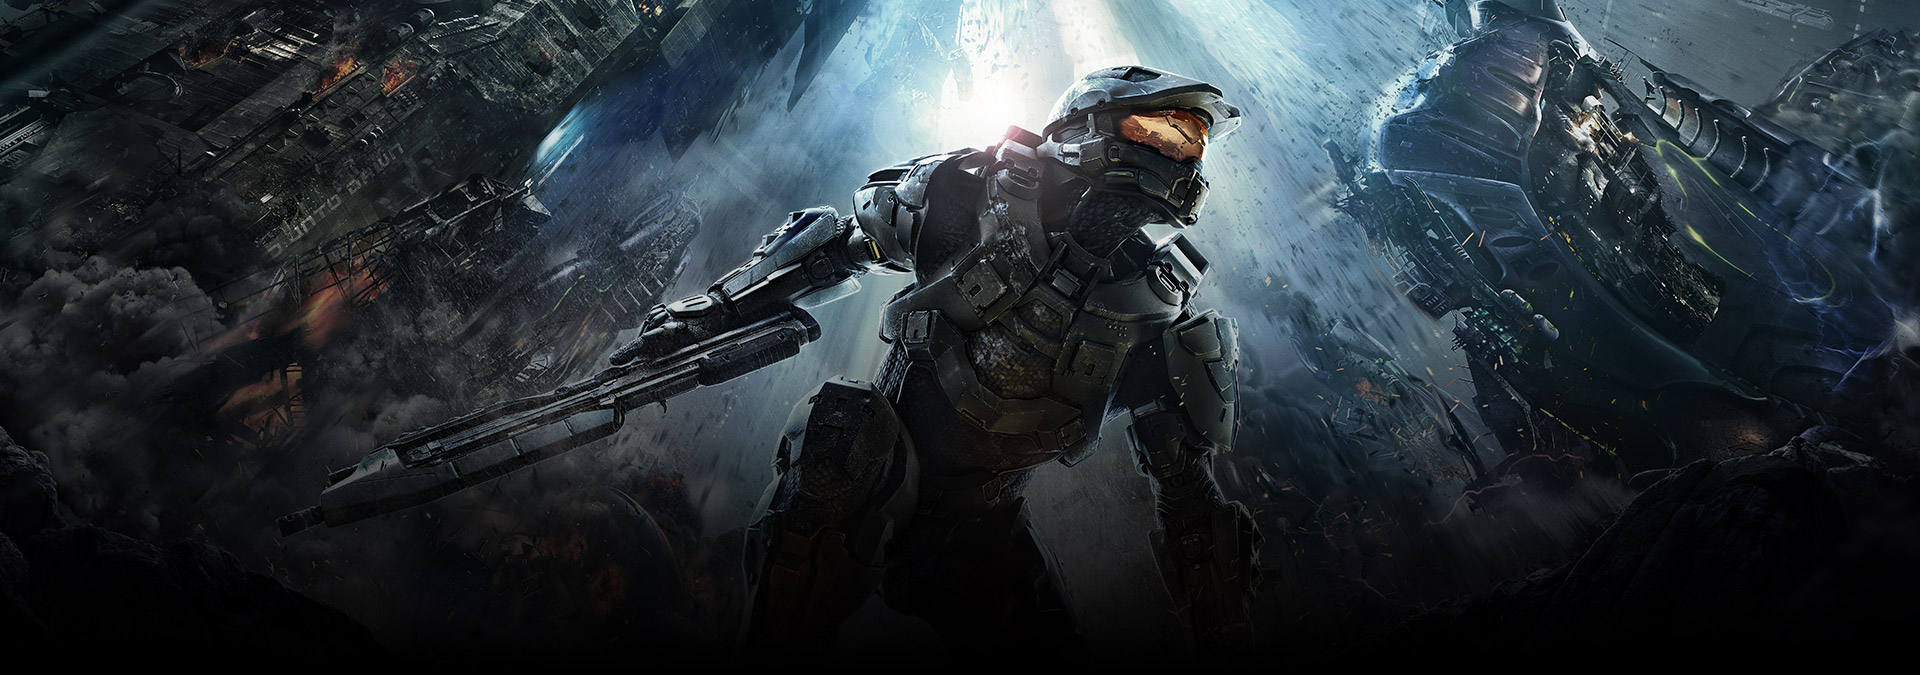 halo 4 game download for xbox 360